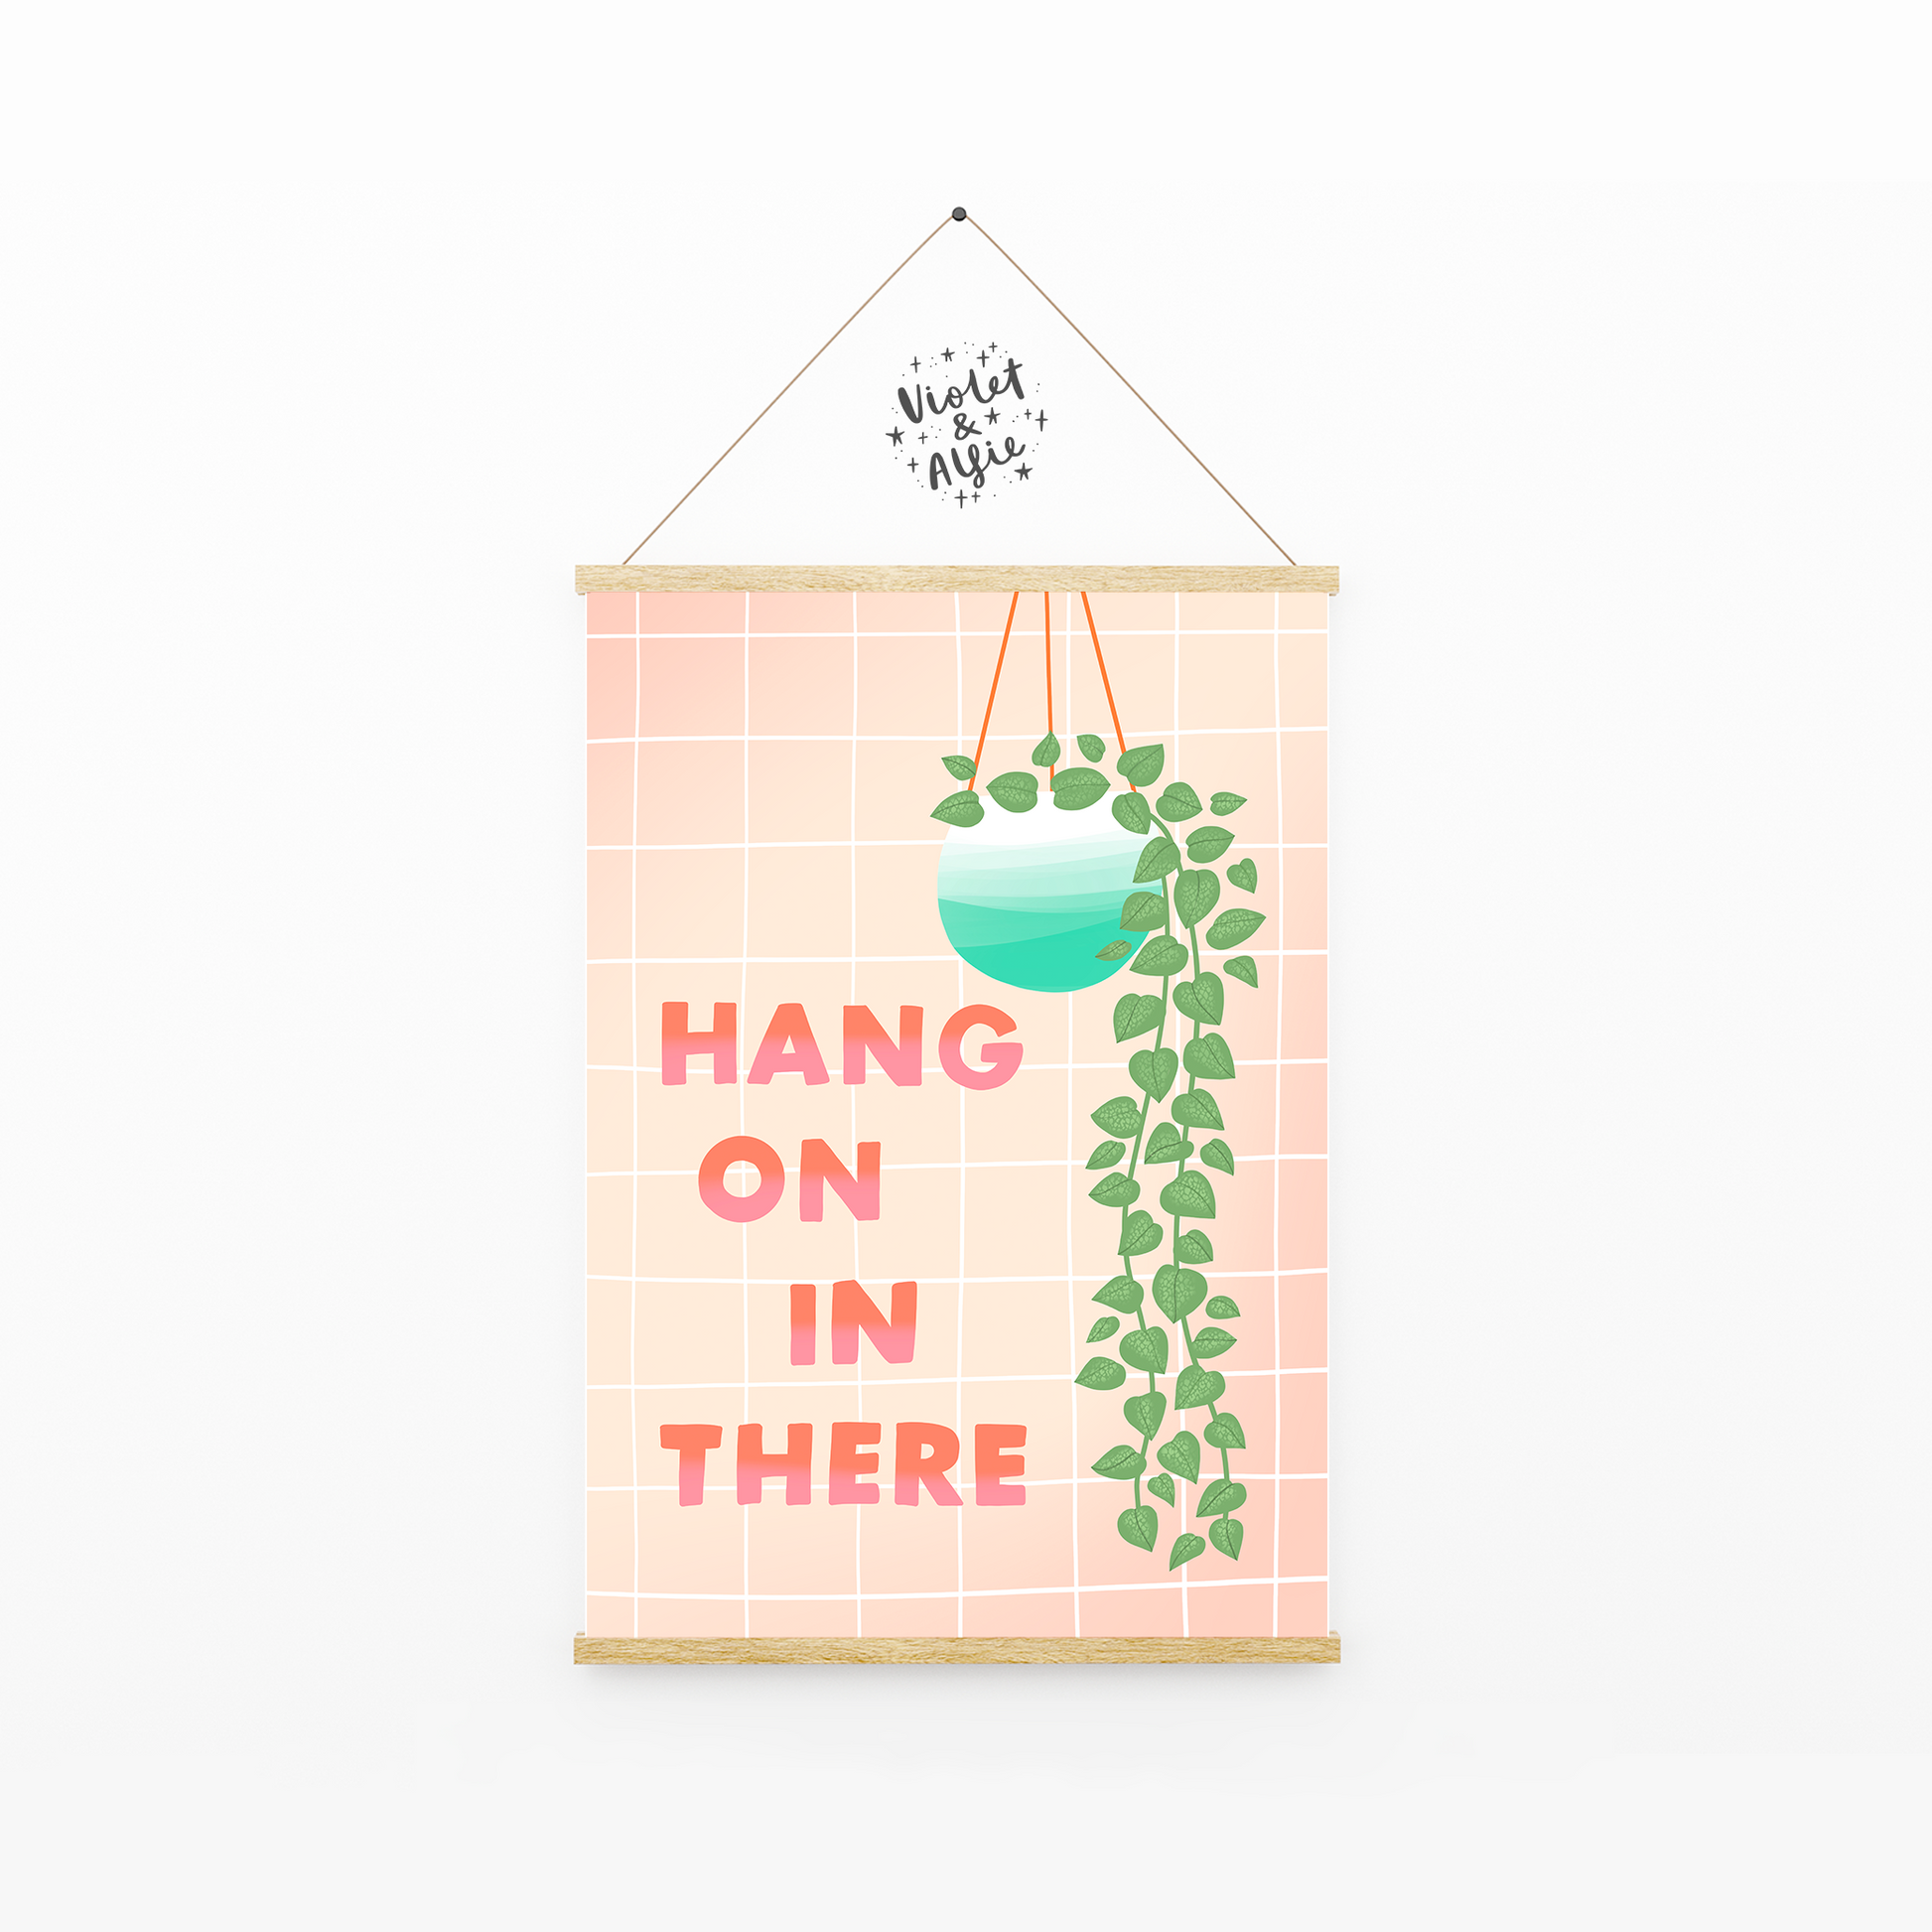 Hang on in there print, encouragement gift, mental health poster, positivity and motivational art, house plant illustration, strength print, pastel decor, plant decor, inspirational prints